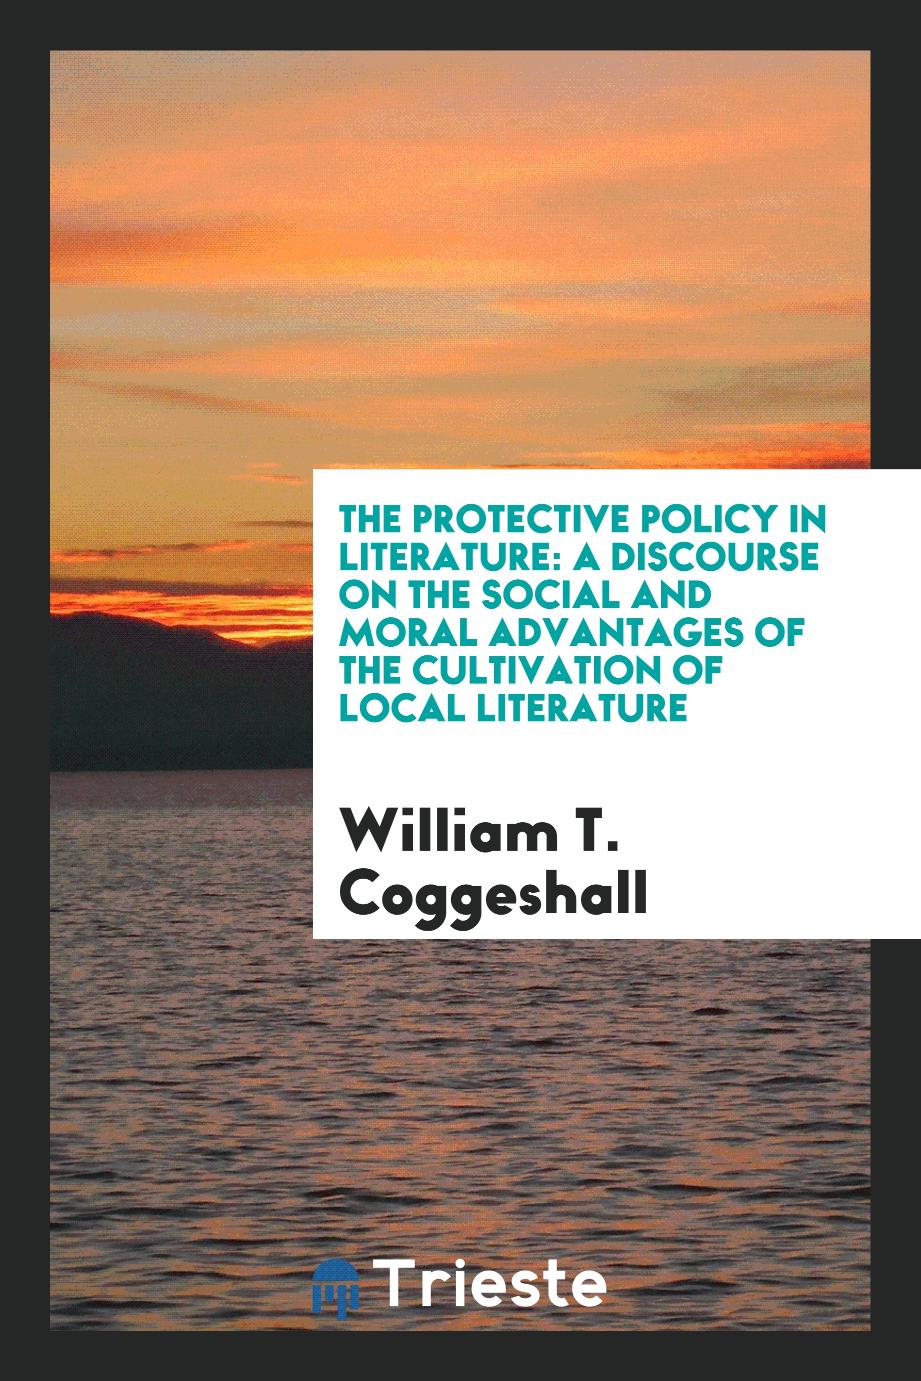 The Protective Policy in Literature: A Discourse on the Social and Moral Advantages of the Cultivation of Local Literature